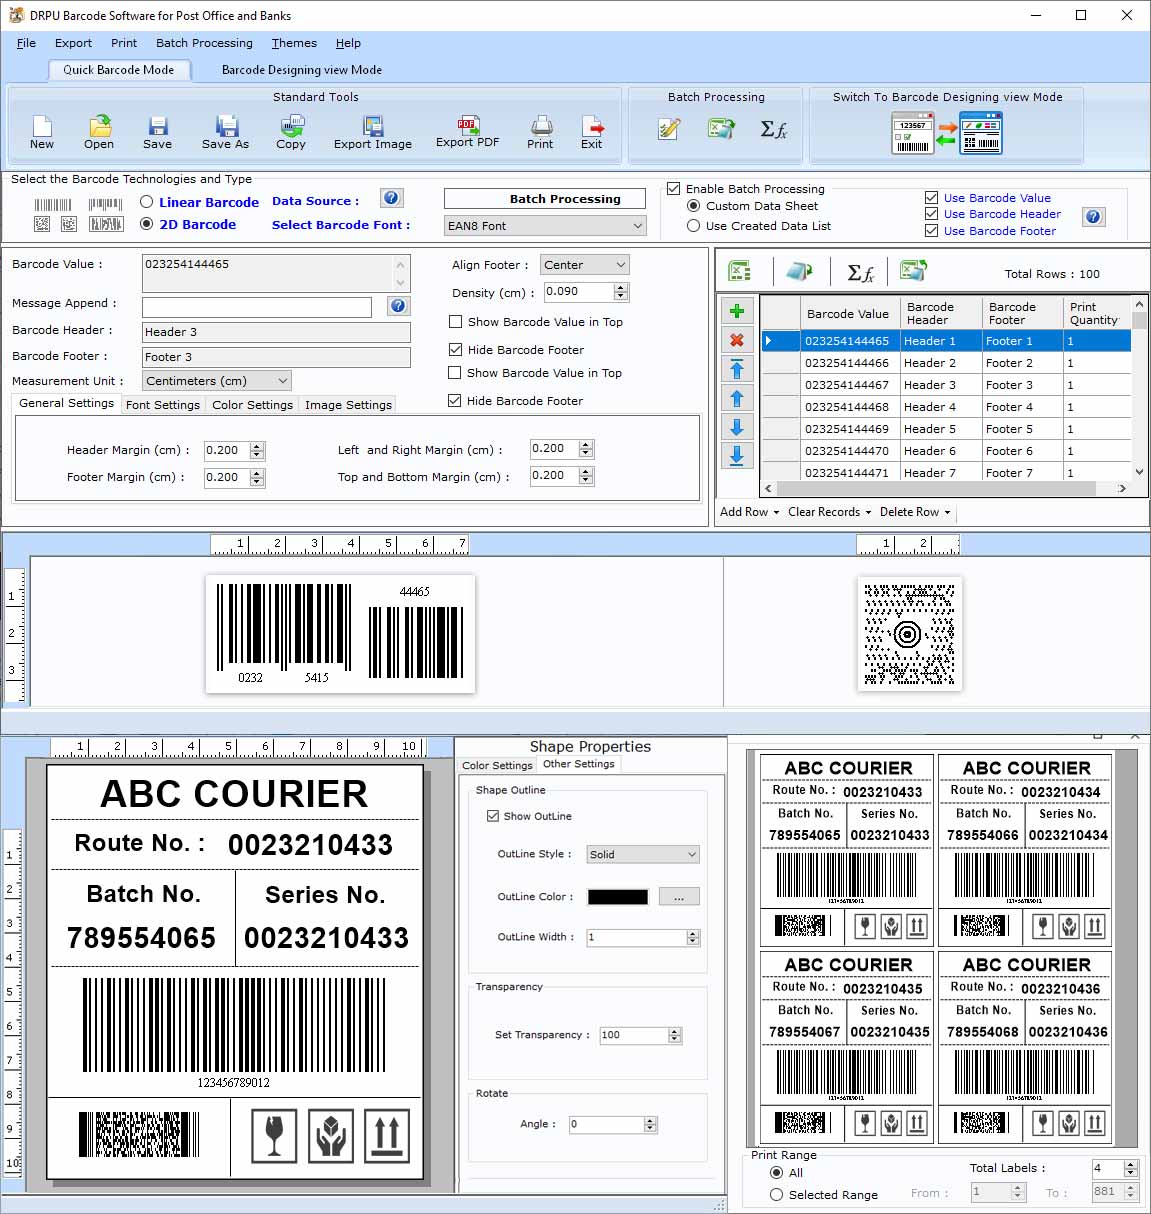 Screenshot of Barcode Inventory System